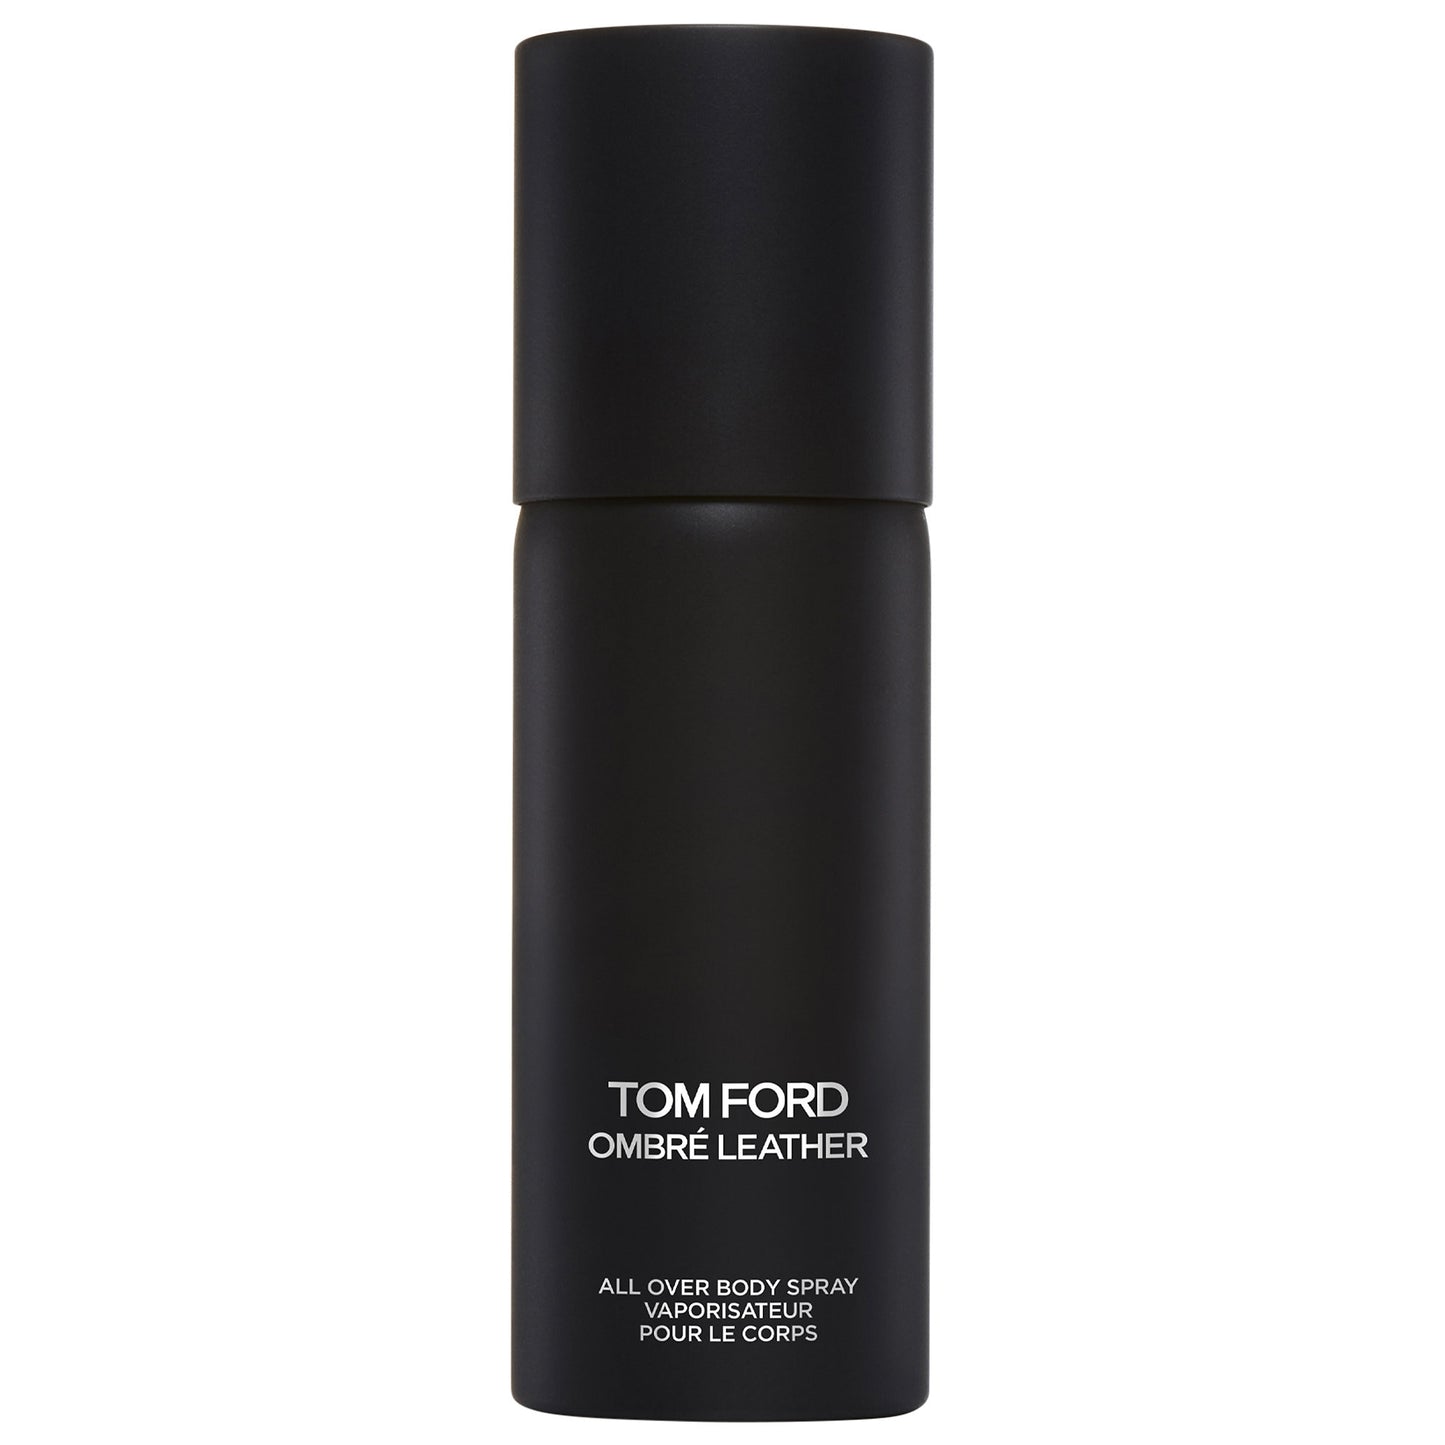 Tom Ford - Ombre Leather Body Spray 150ml